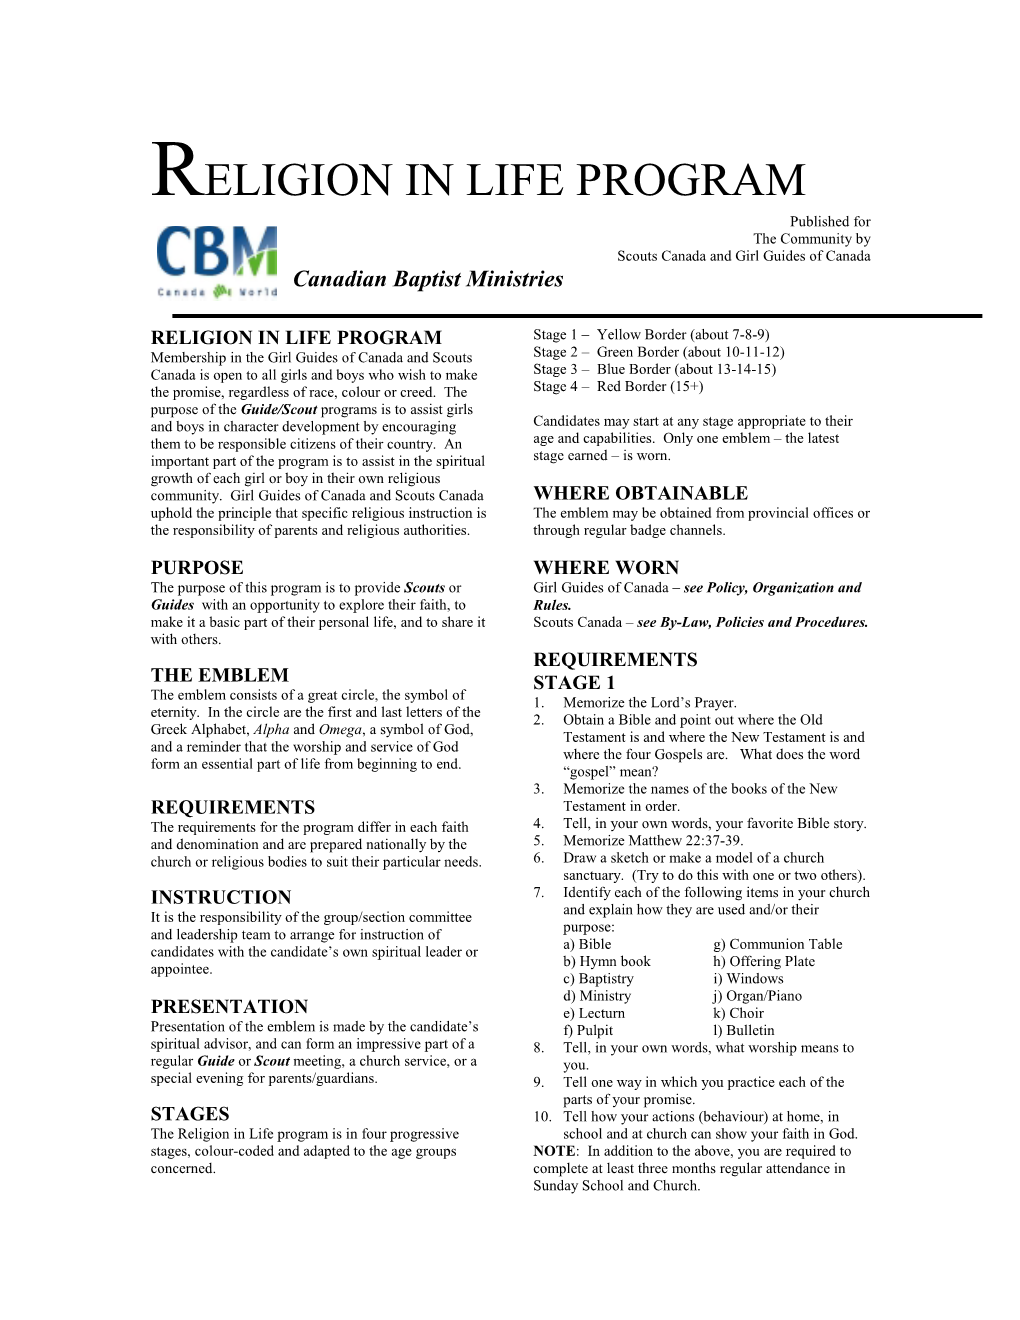 RELIGION in LIFE PROGRAM Published for the Community by Scouts Canada and Girl Guides of Canada Canadian Baptist Ministries